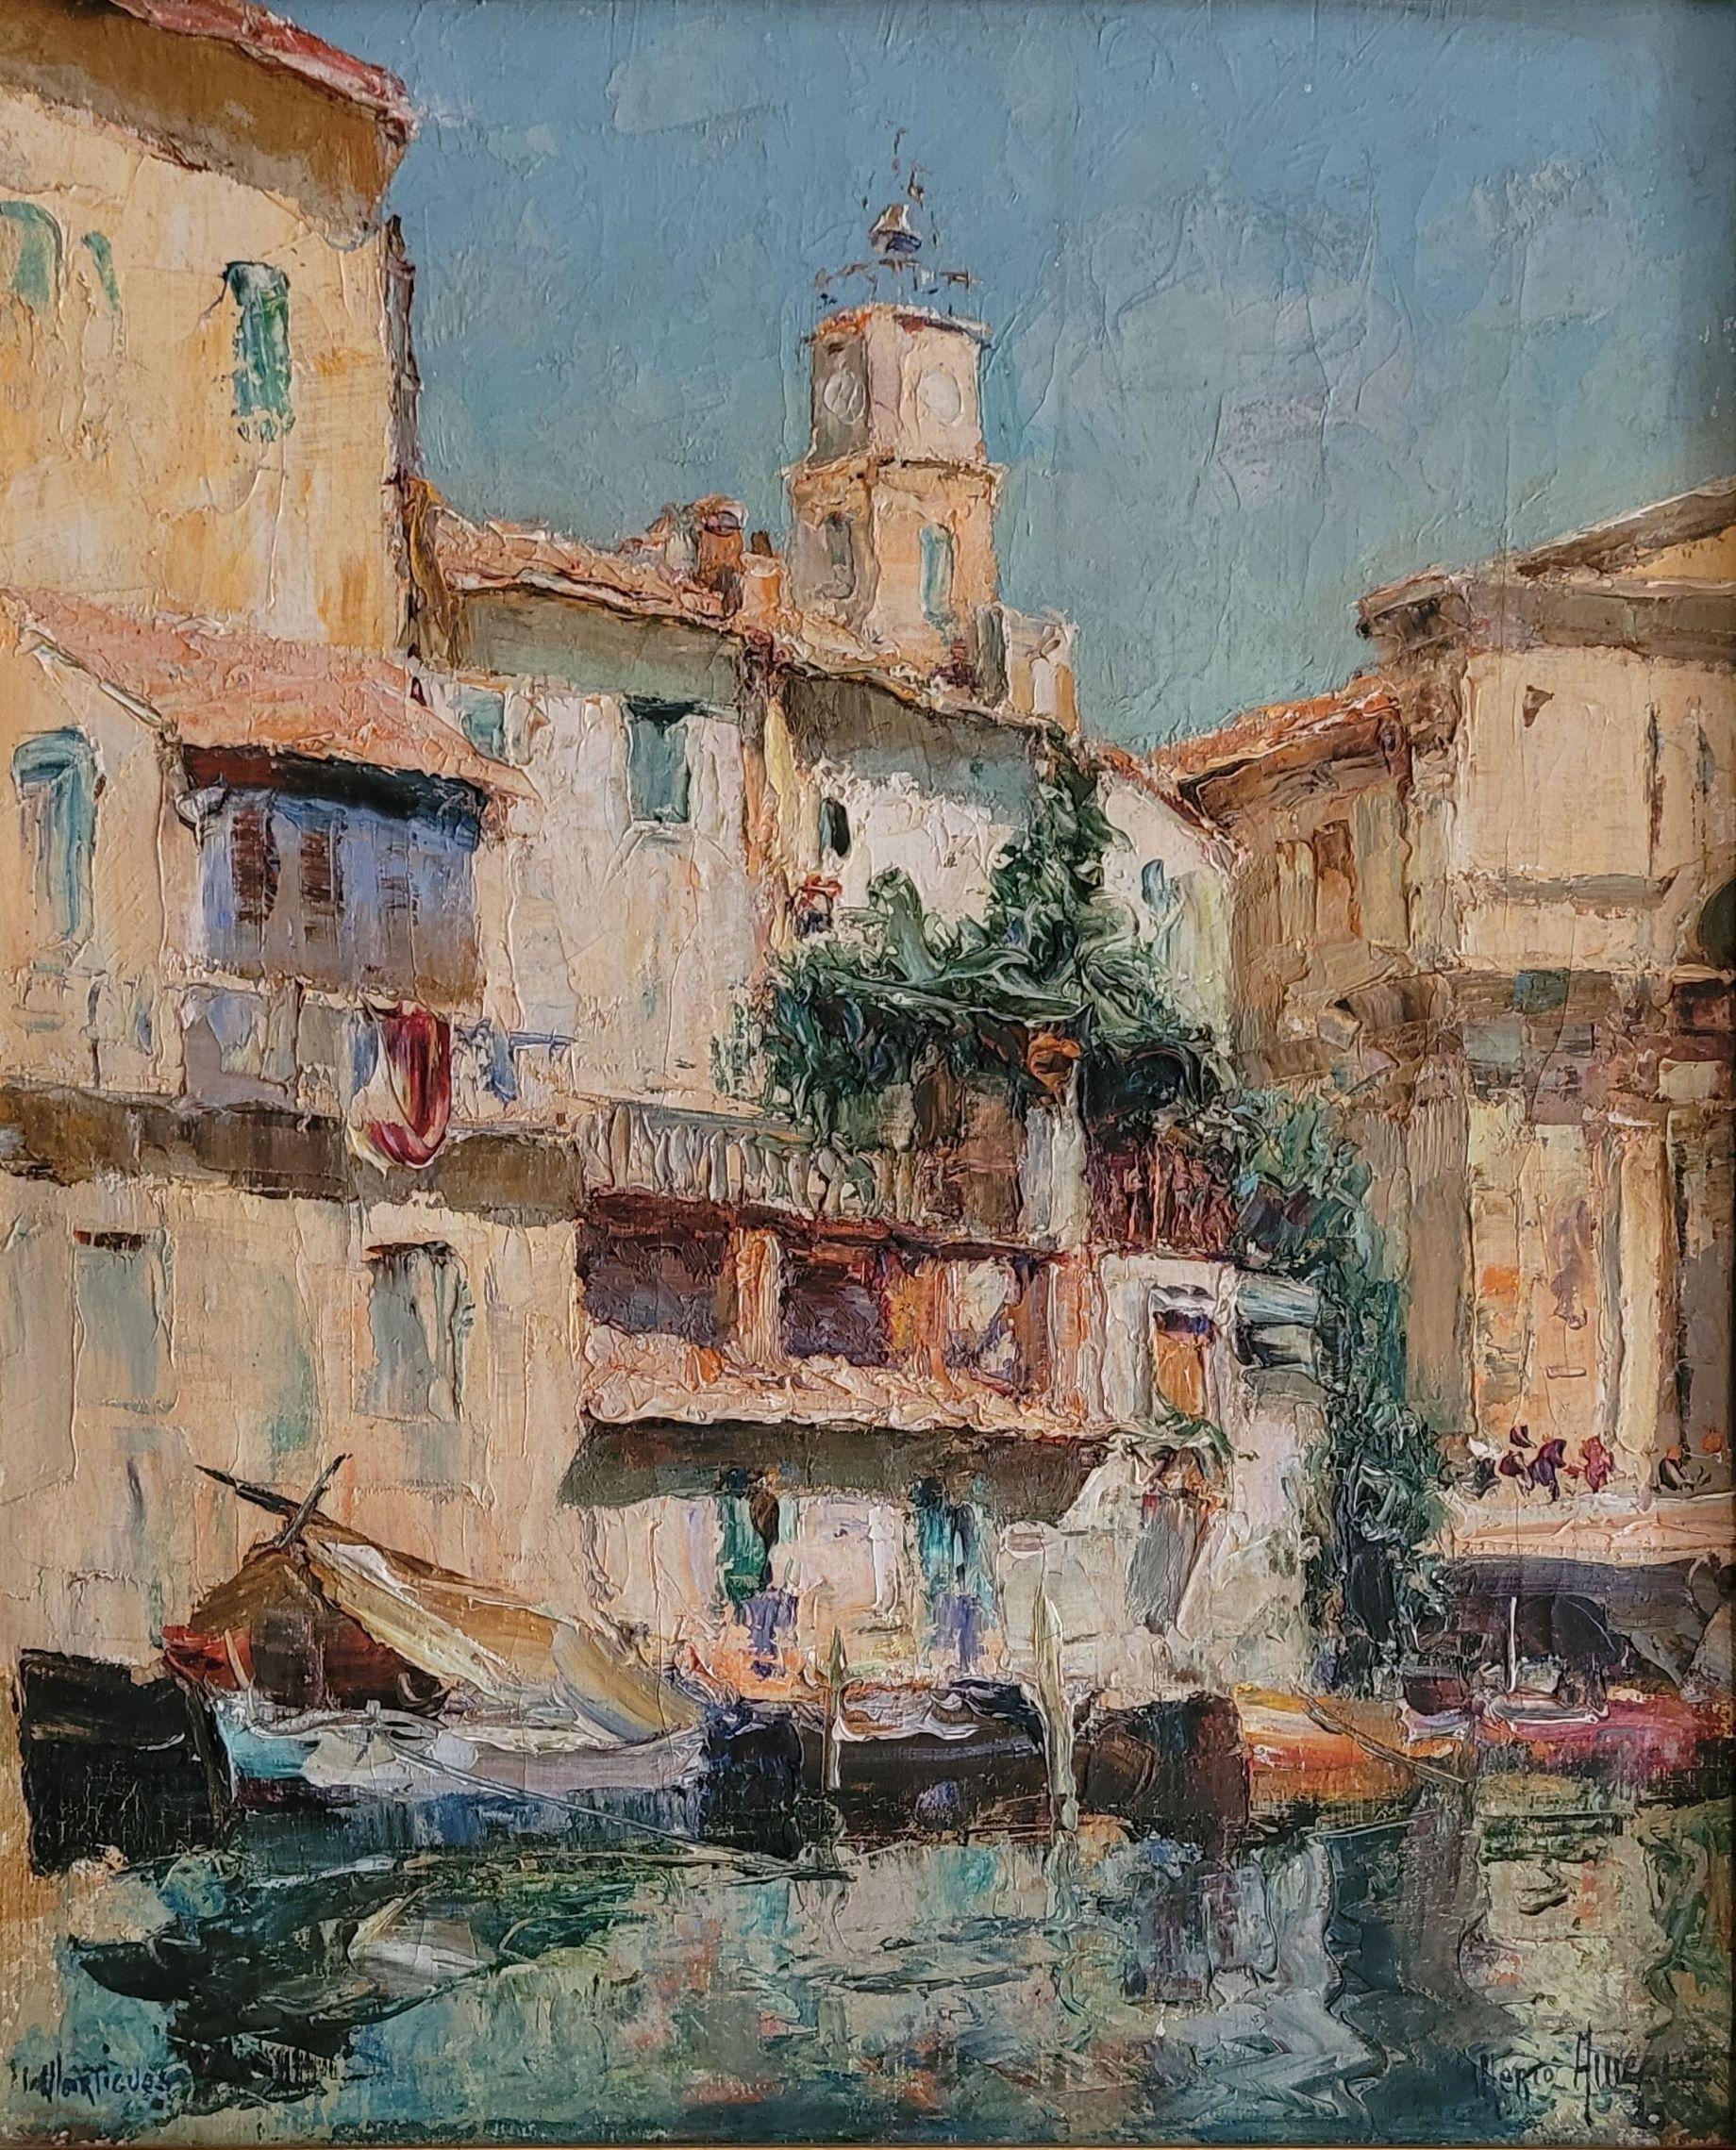 Martigues - Painting by Merio Ameglio